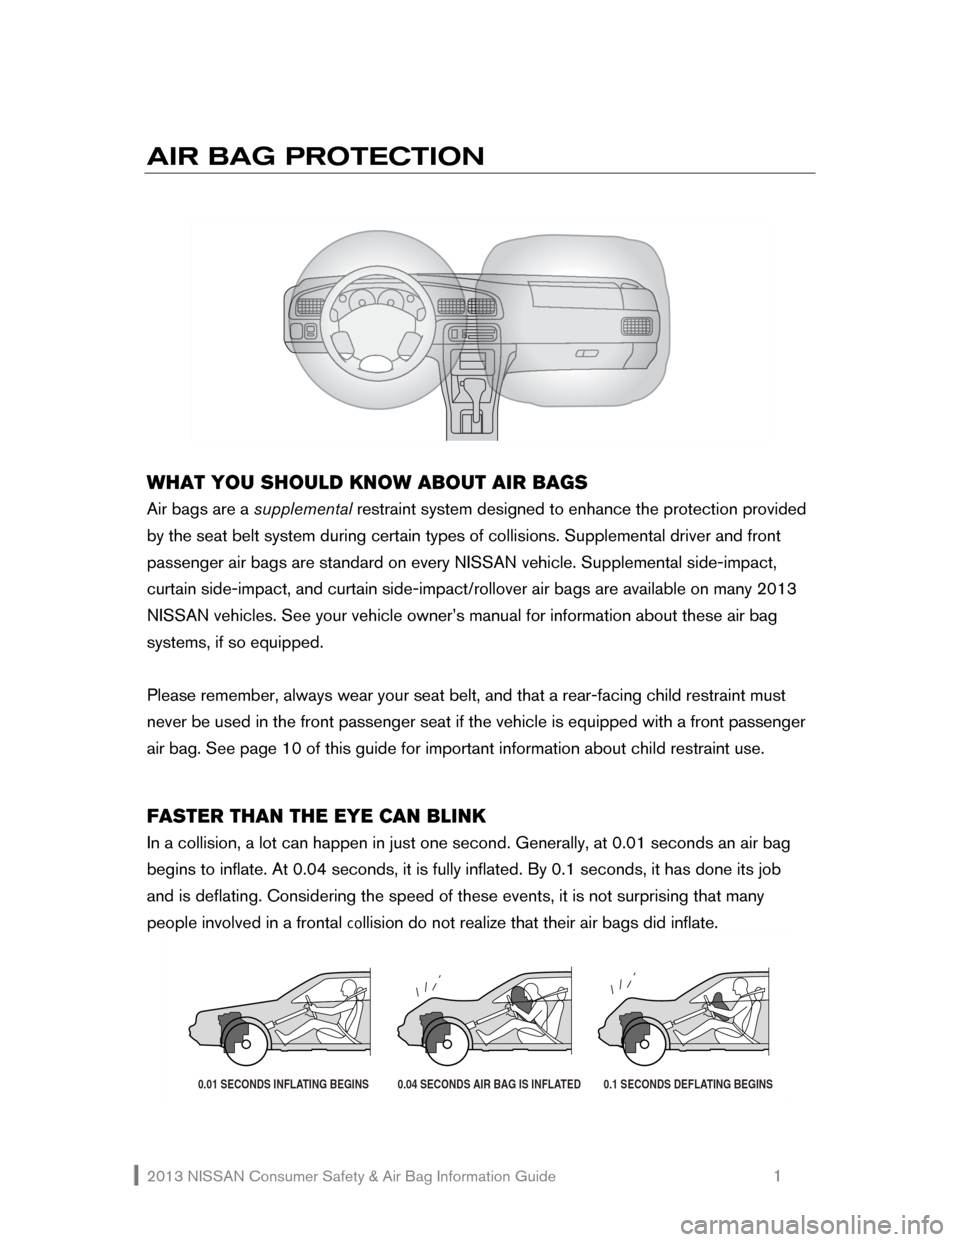 NISSAN 370Z ROADSTER 2013 Z34 Consumer Safety Air Bag Information Guide 2013 NISSAN Consumer Safety & Air Bag Information Guide                                                   1 
AIR BAG PROTECTION 
    
 
 
WHAT YOU SHOULD KNOW ABOUT AIR BAGS 
Air bags are a supplement